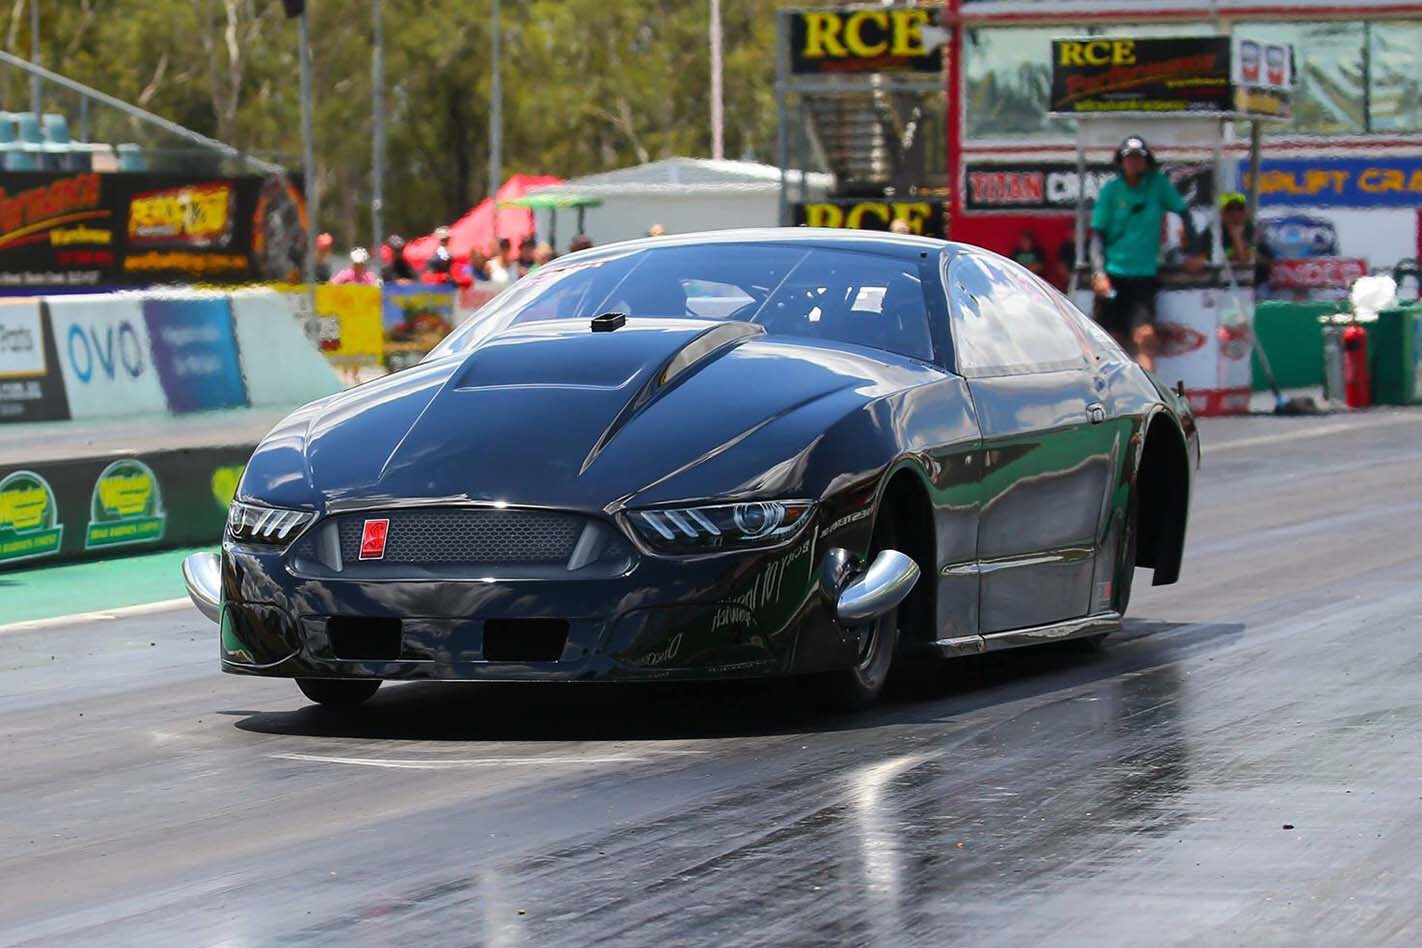 Aussie Top Fuel Champ Kelly Bettes tests 4000hp Pro Mod Mustang